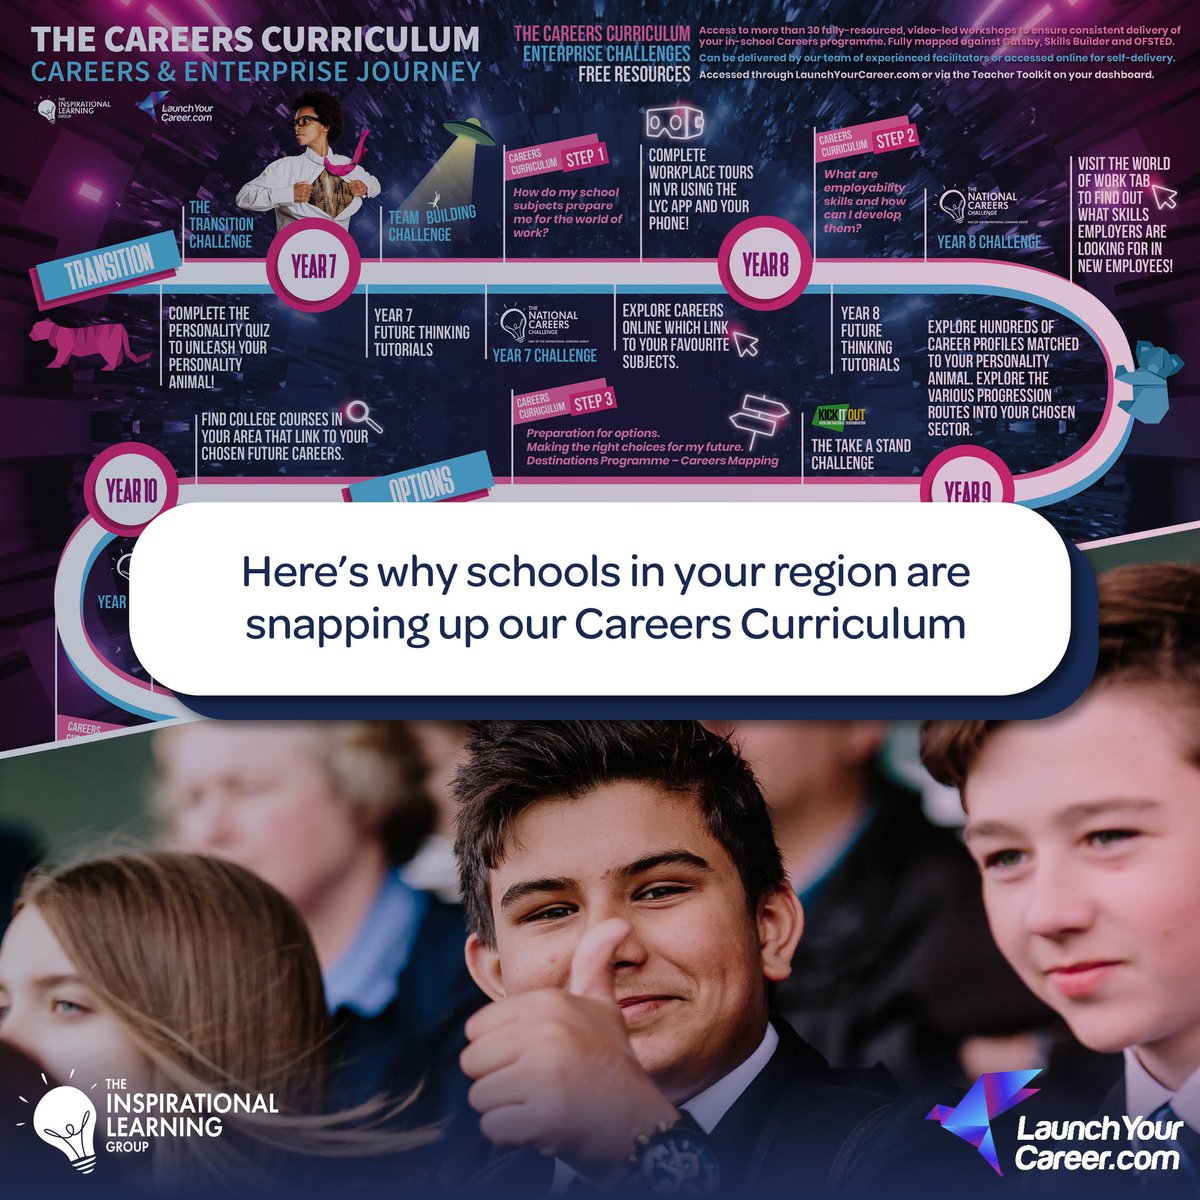 Earlier this academic year, we launched our Careers Curriculum, and it’s been an enormous hit with schools across the country. We share three of the most common reasons our Careers Curriculum is so popular! 💪

Read more here 👉 bit.ly/Careers-Curric…

#careerdiscovery #edtech